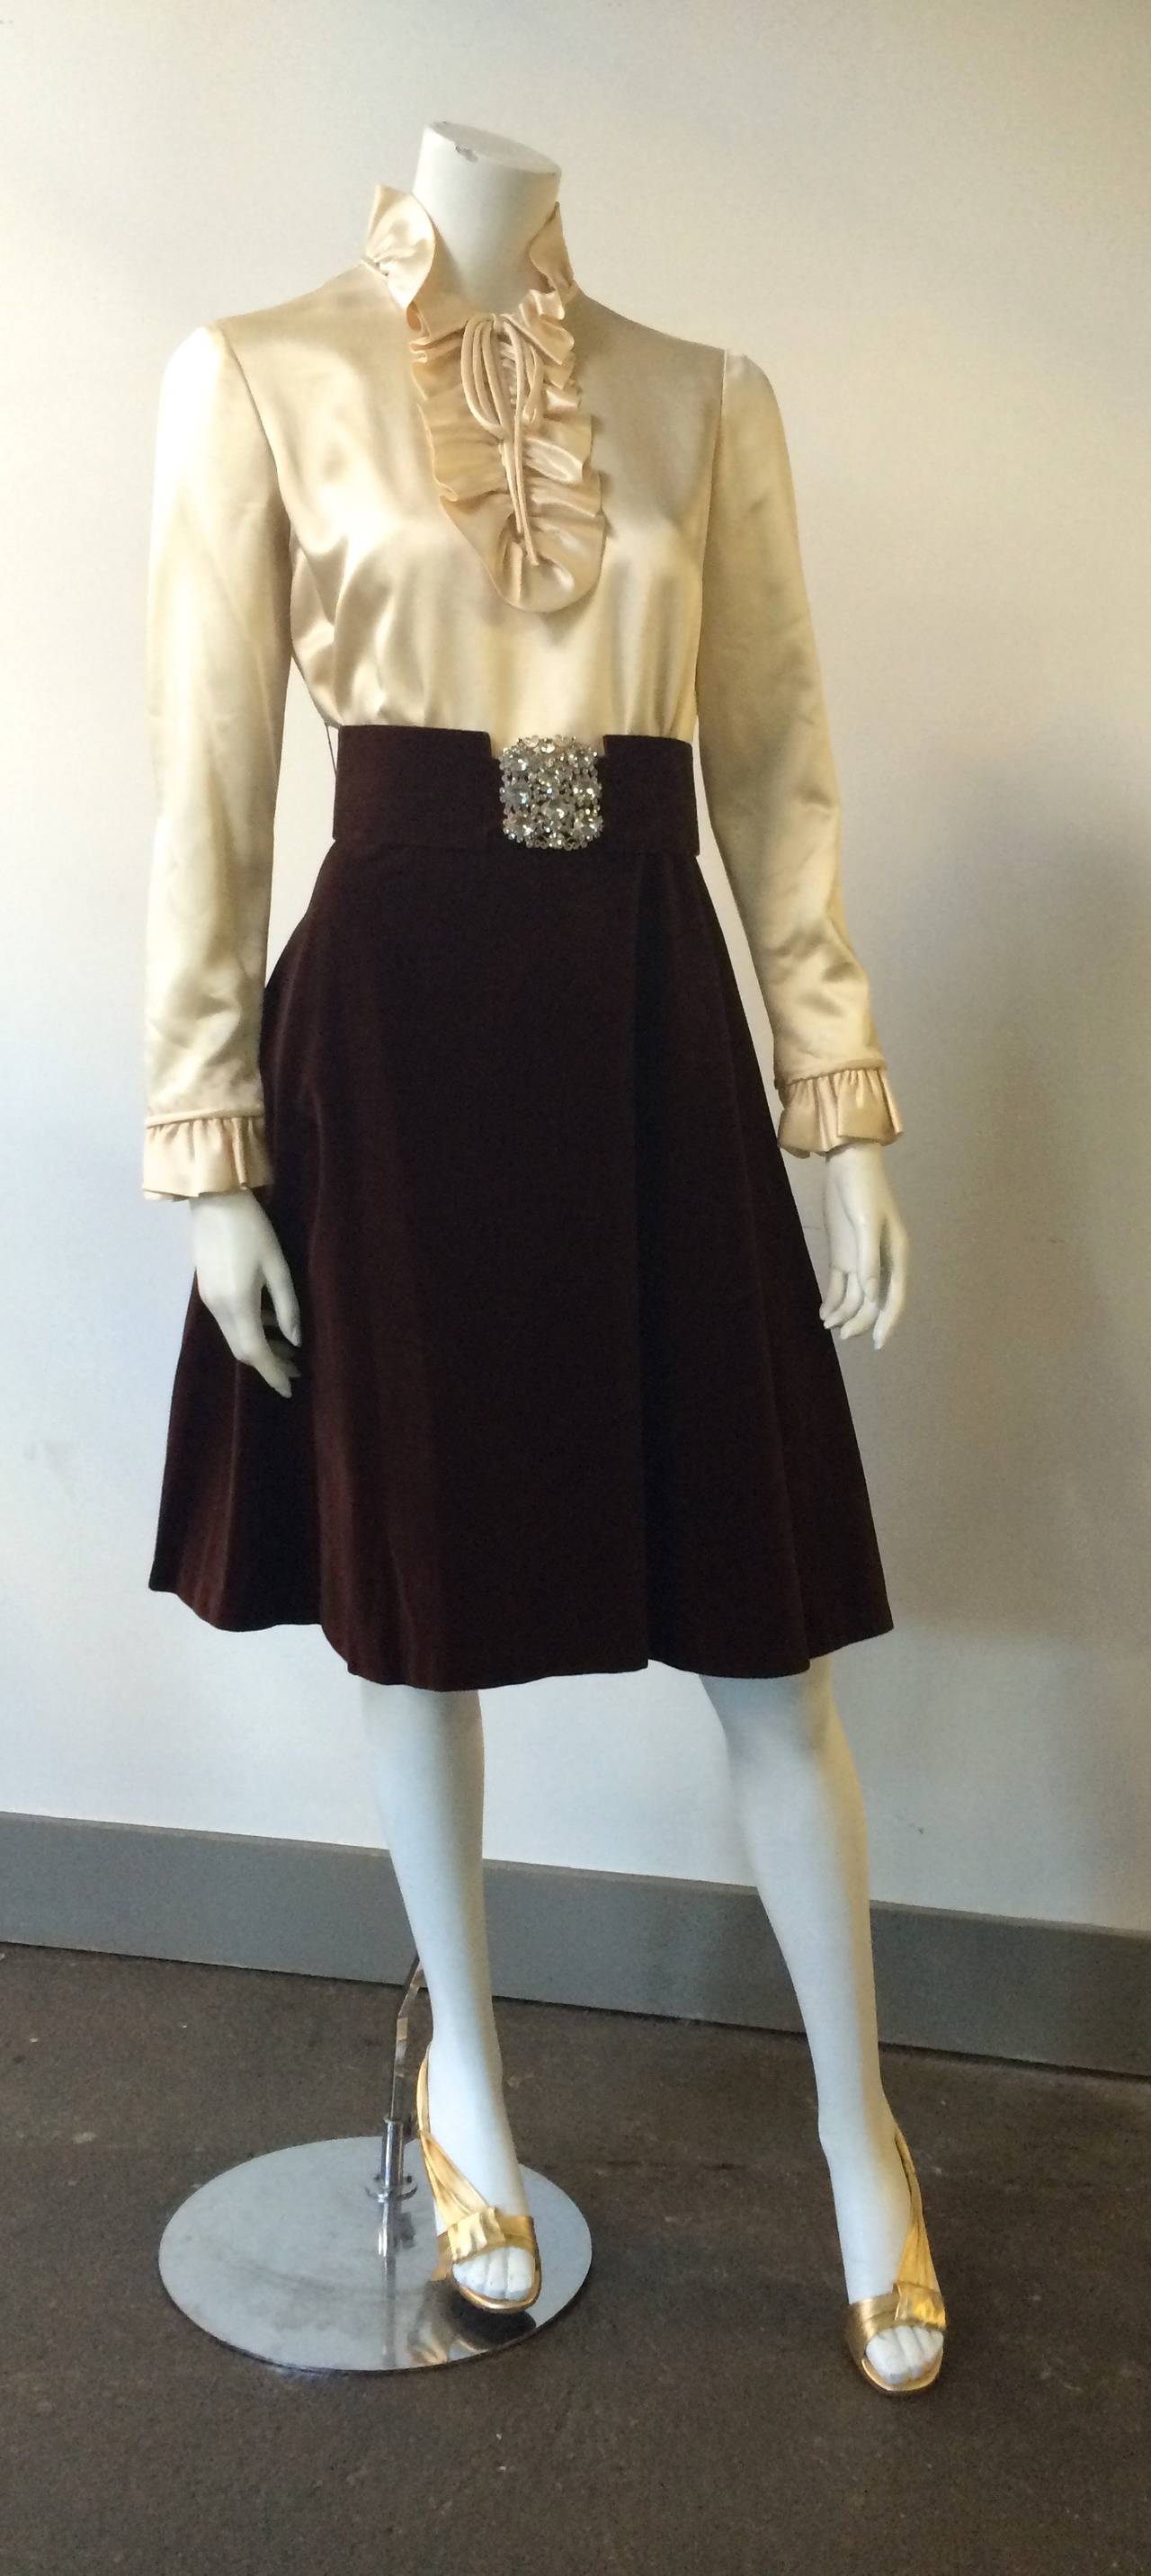 Teal Traina 60s cream silk ruffled top and brown velvet dress, velvet matching jacket and rhinestone belt (all with original stones). This 3 piece vintage set is breathtaking. You can wear the dress with or without belt or jacket, so this ensemble